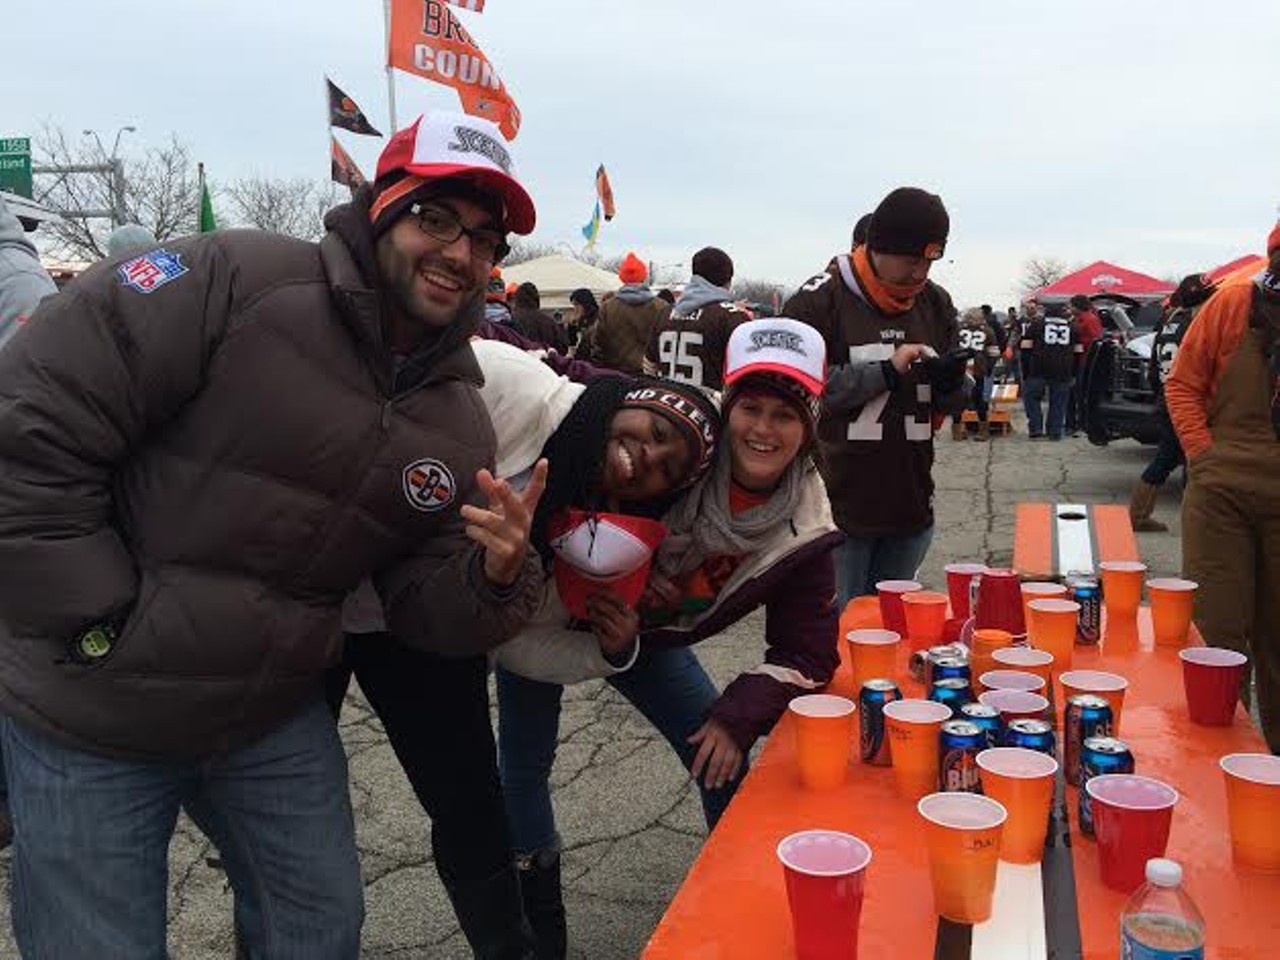 22 Photos of the Scene Events Team at the Browns vs. Texans Muni Lot Tailgate